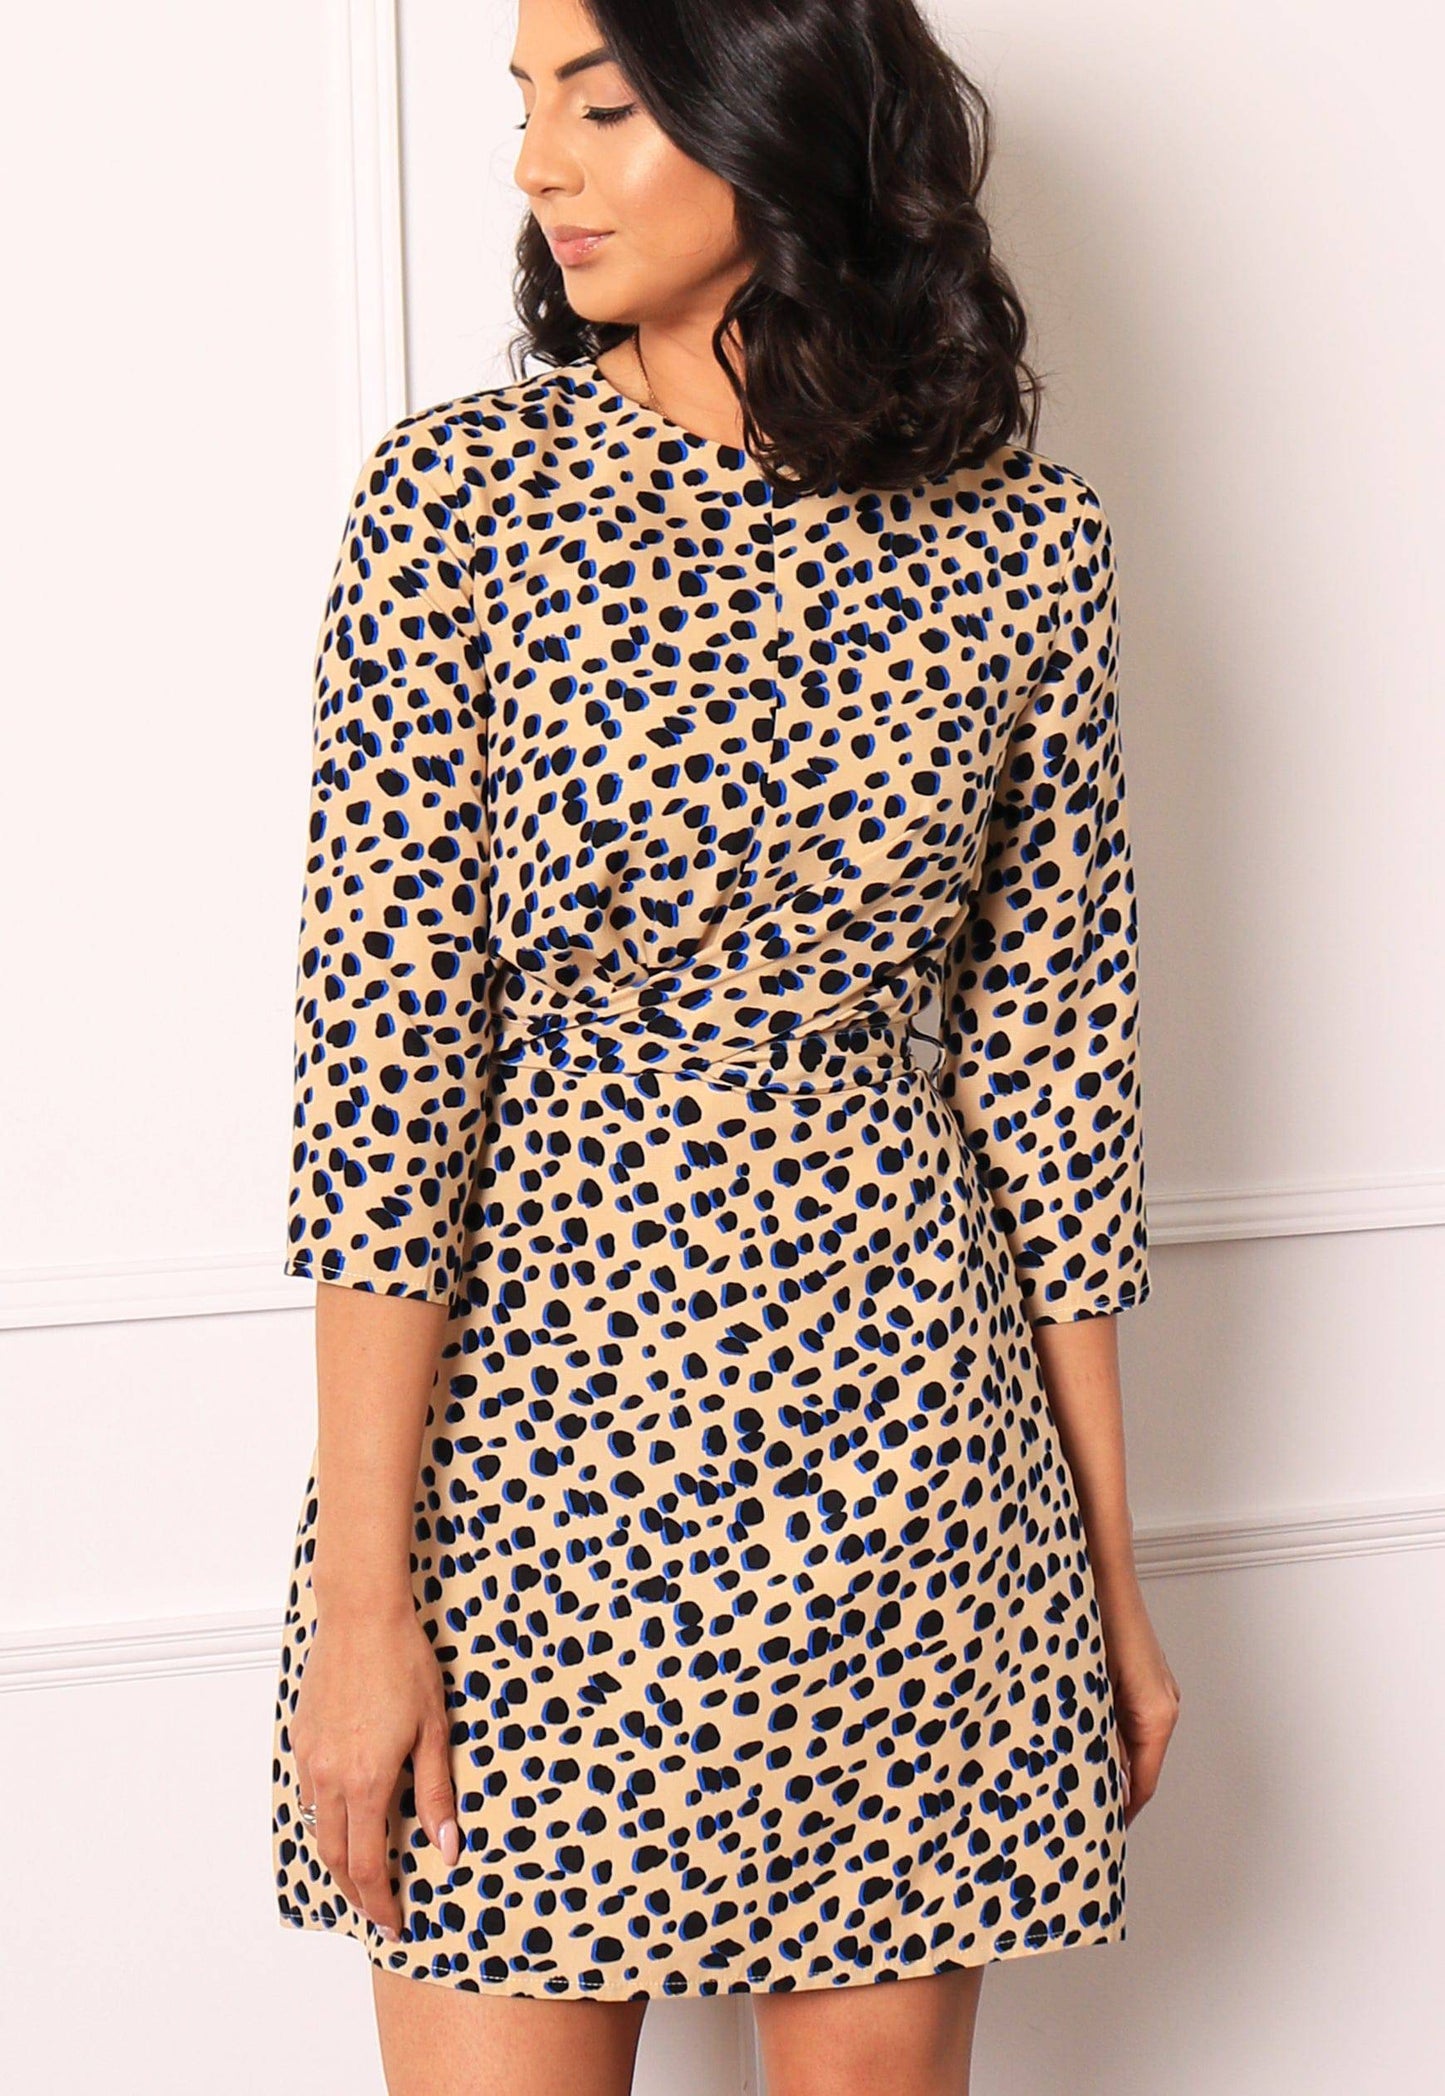 Dalmatian Spot Print Twist Belted Mini Dress with Skater Skirt in Beige, Black & Blue - One Nation Clothing